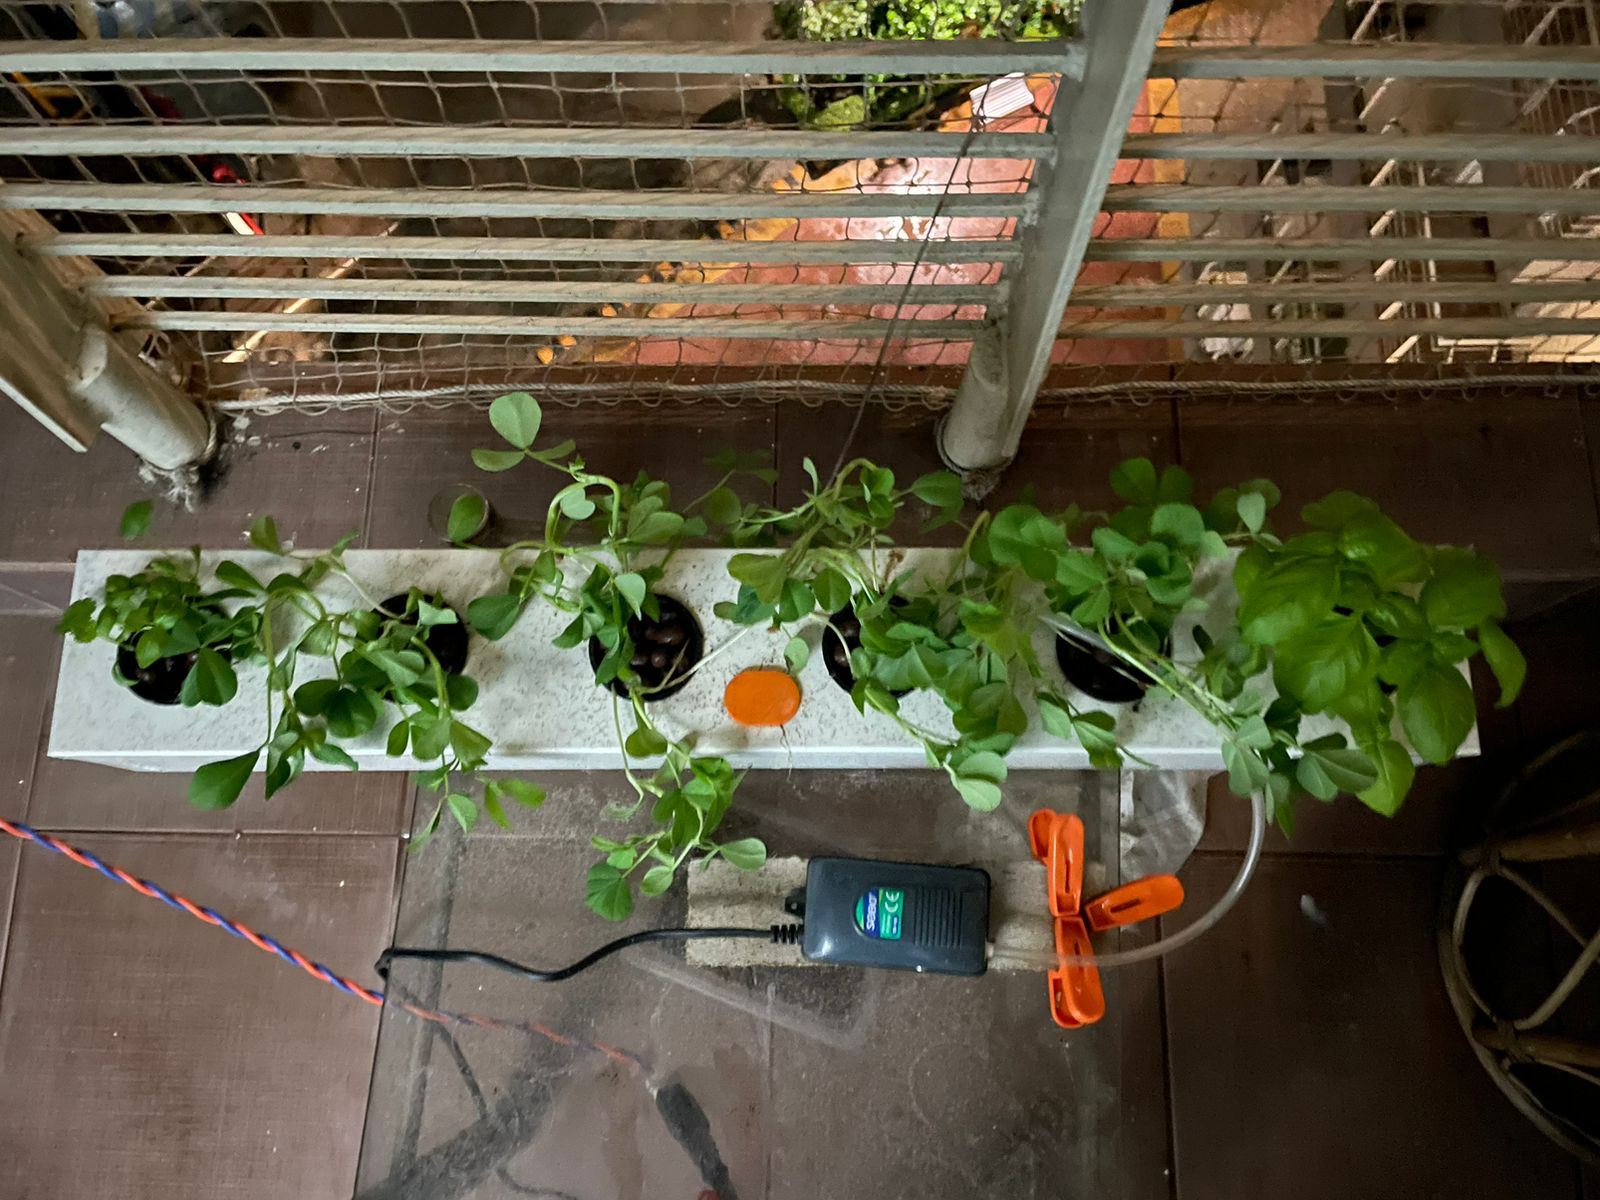 Spinach grown Hydroponically